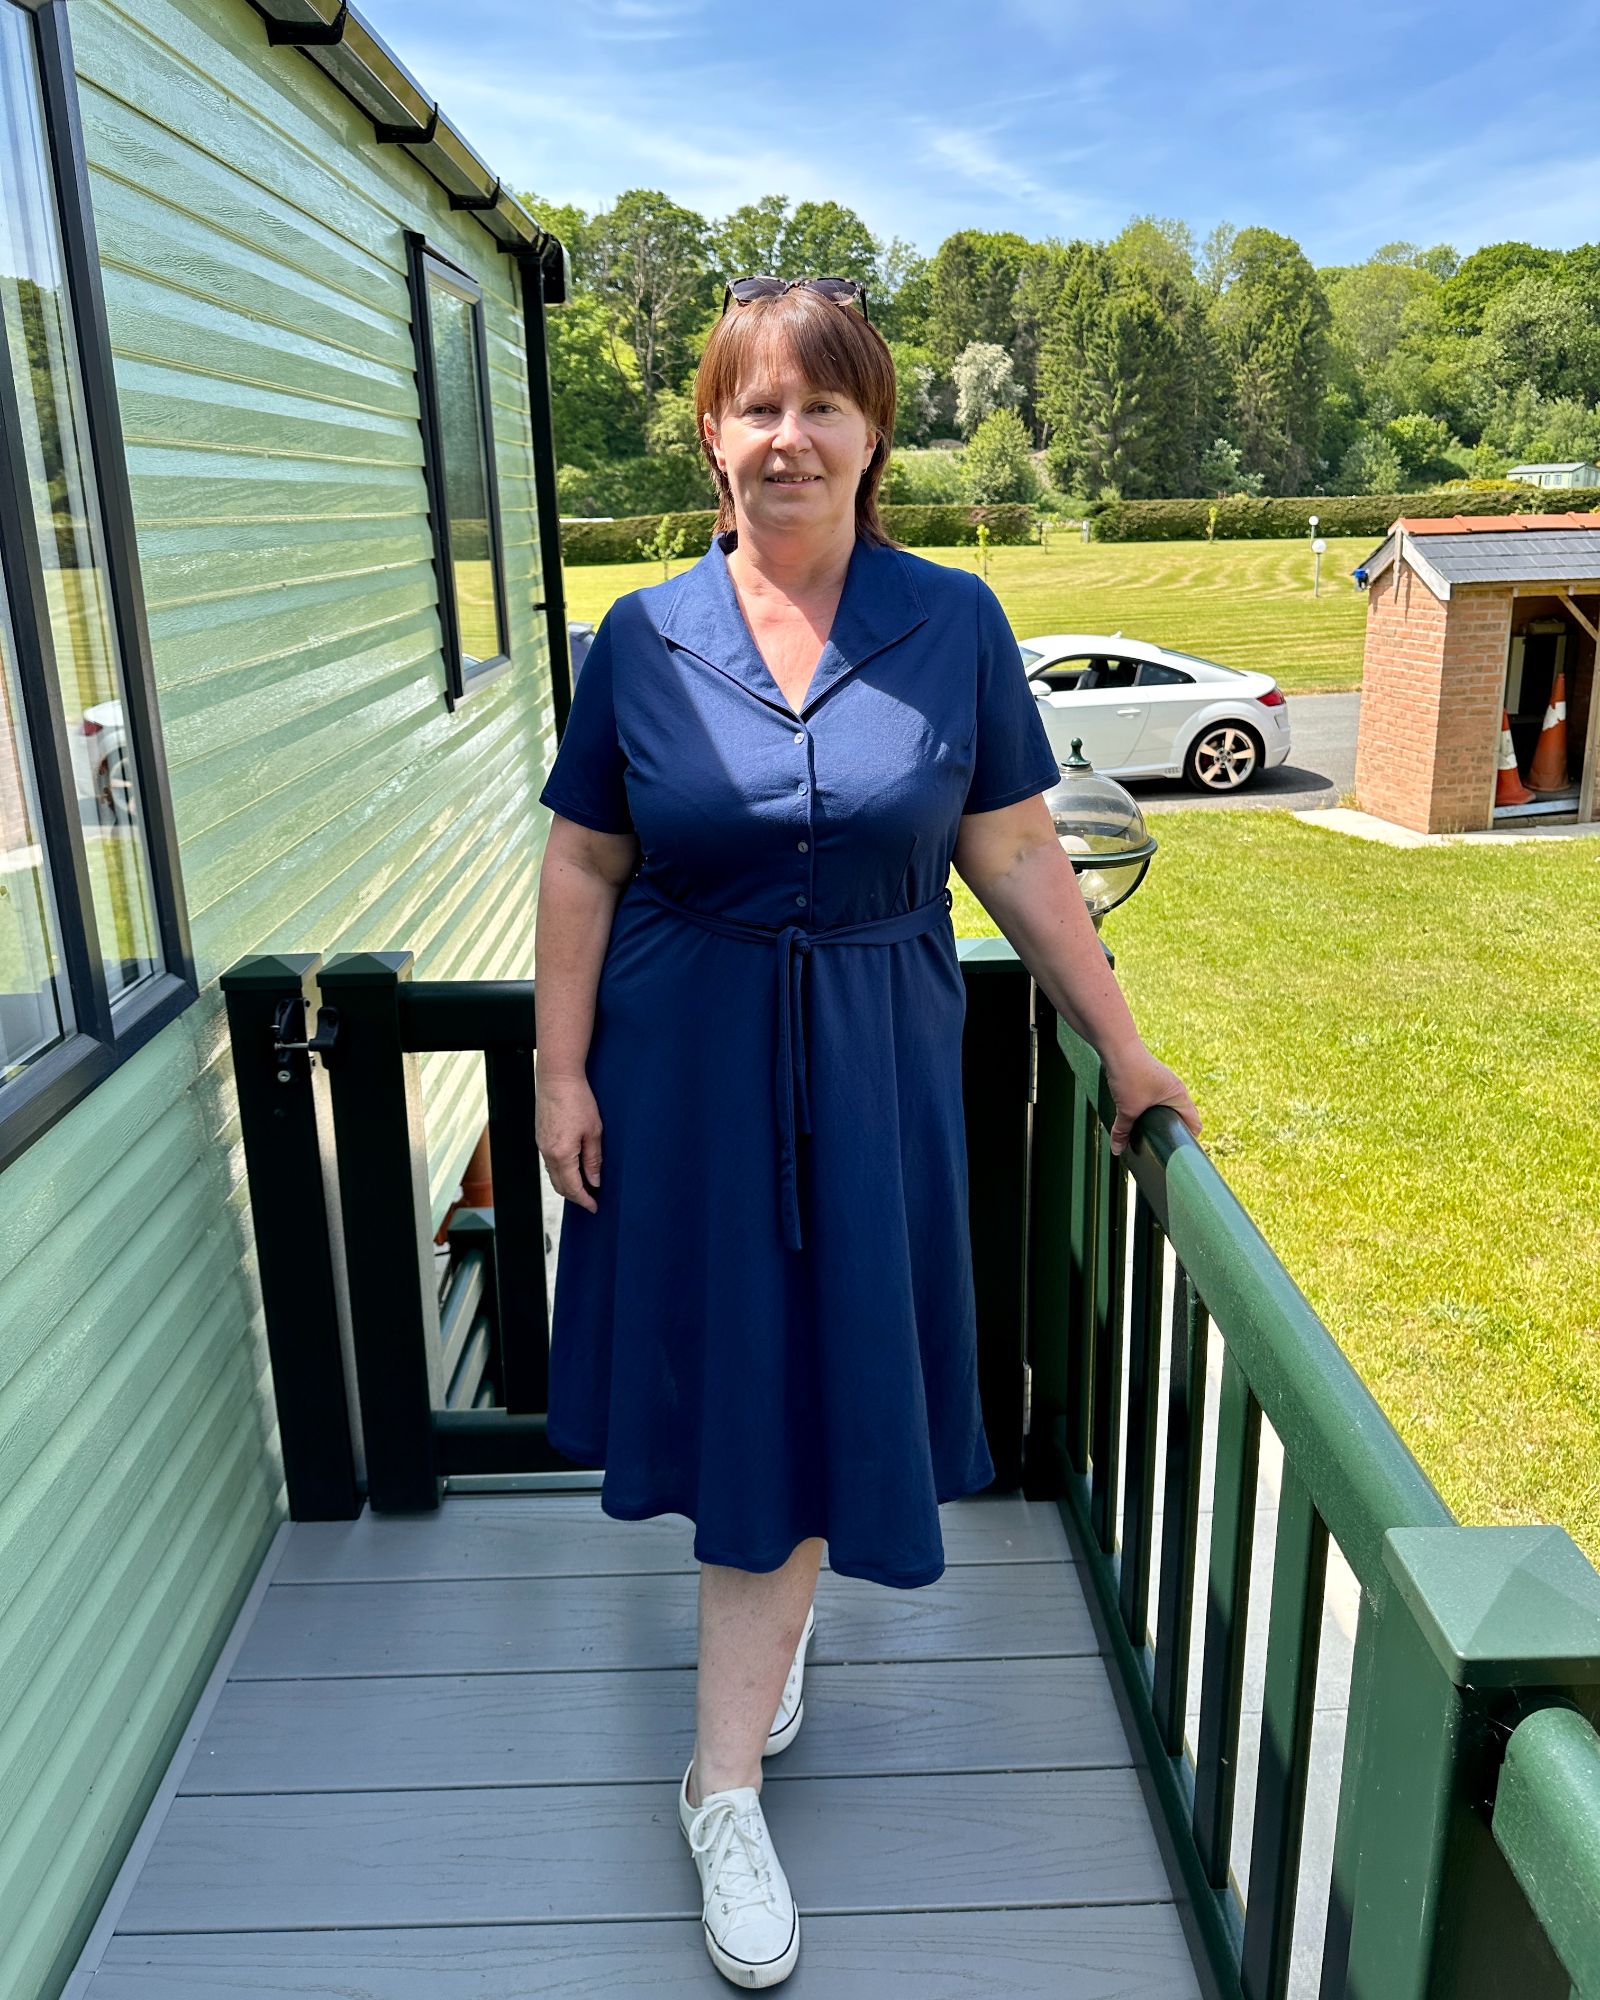 A lady with short brown hair standing on a balcony wearing a navy, knee length dress